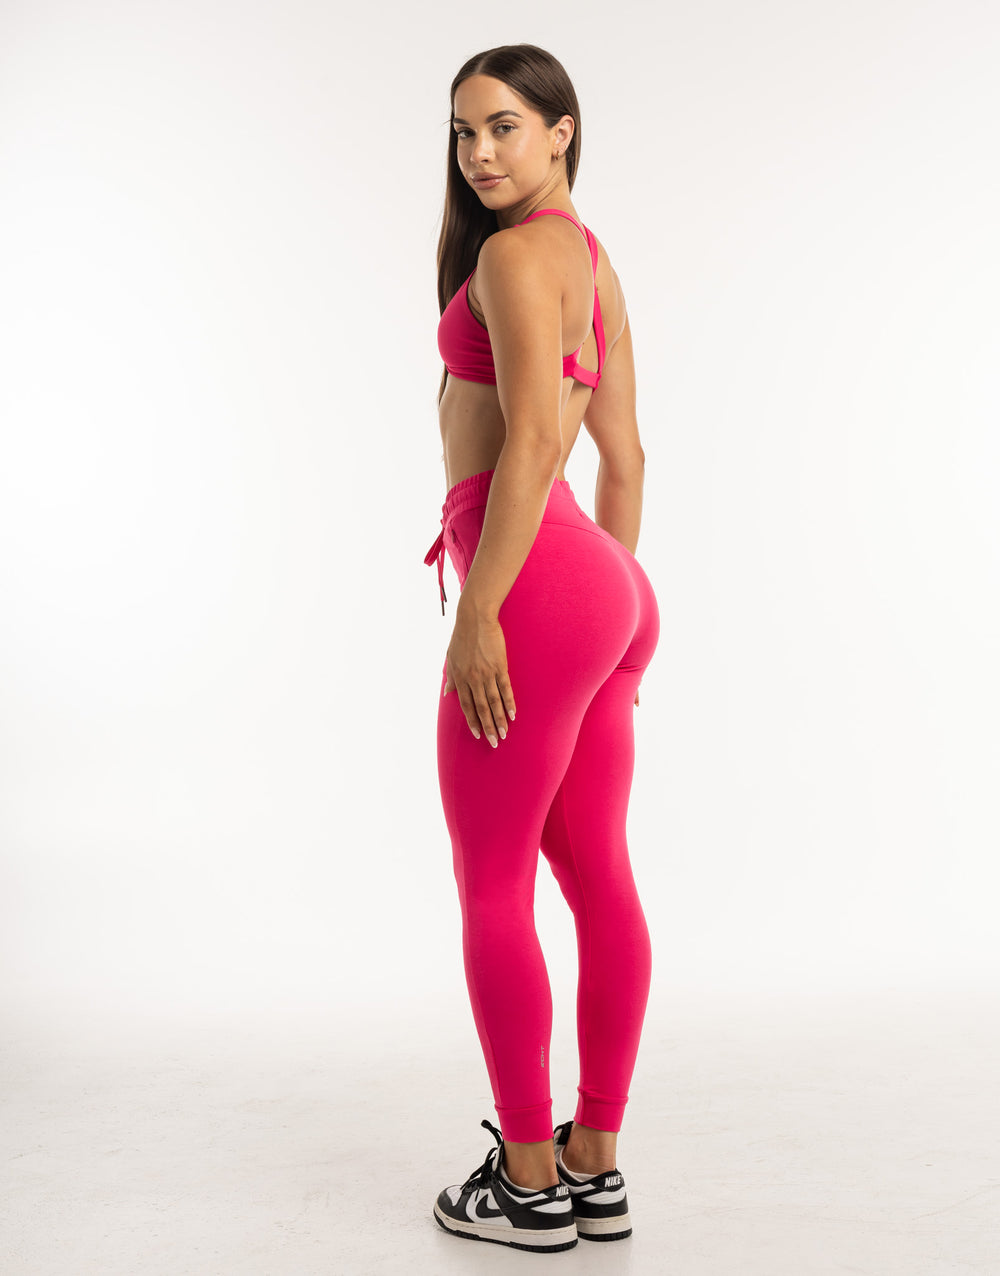 Ladies Tapered Joggers V2 - Bright Pink